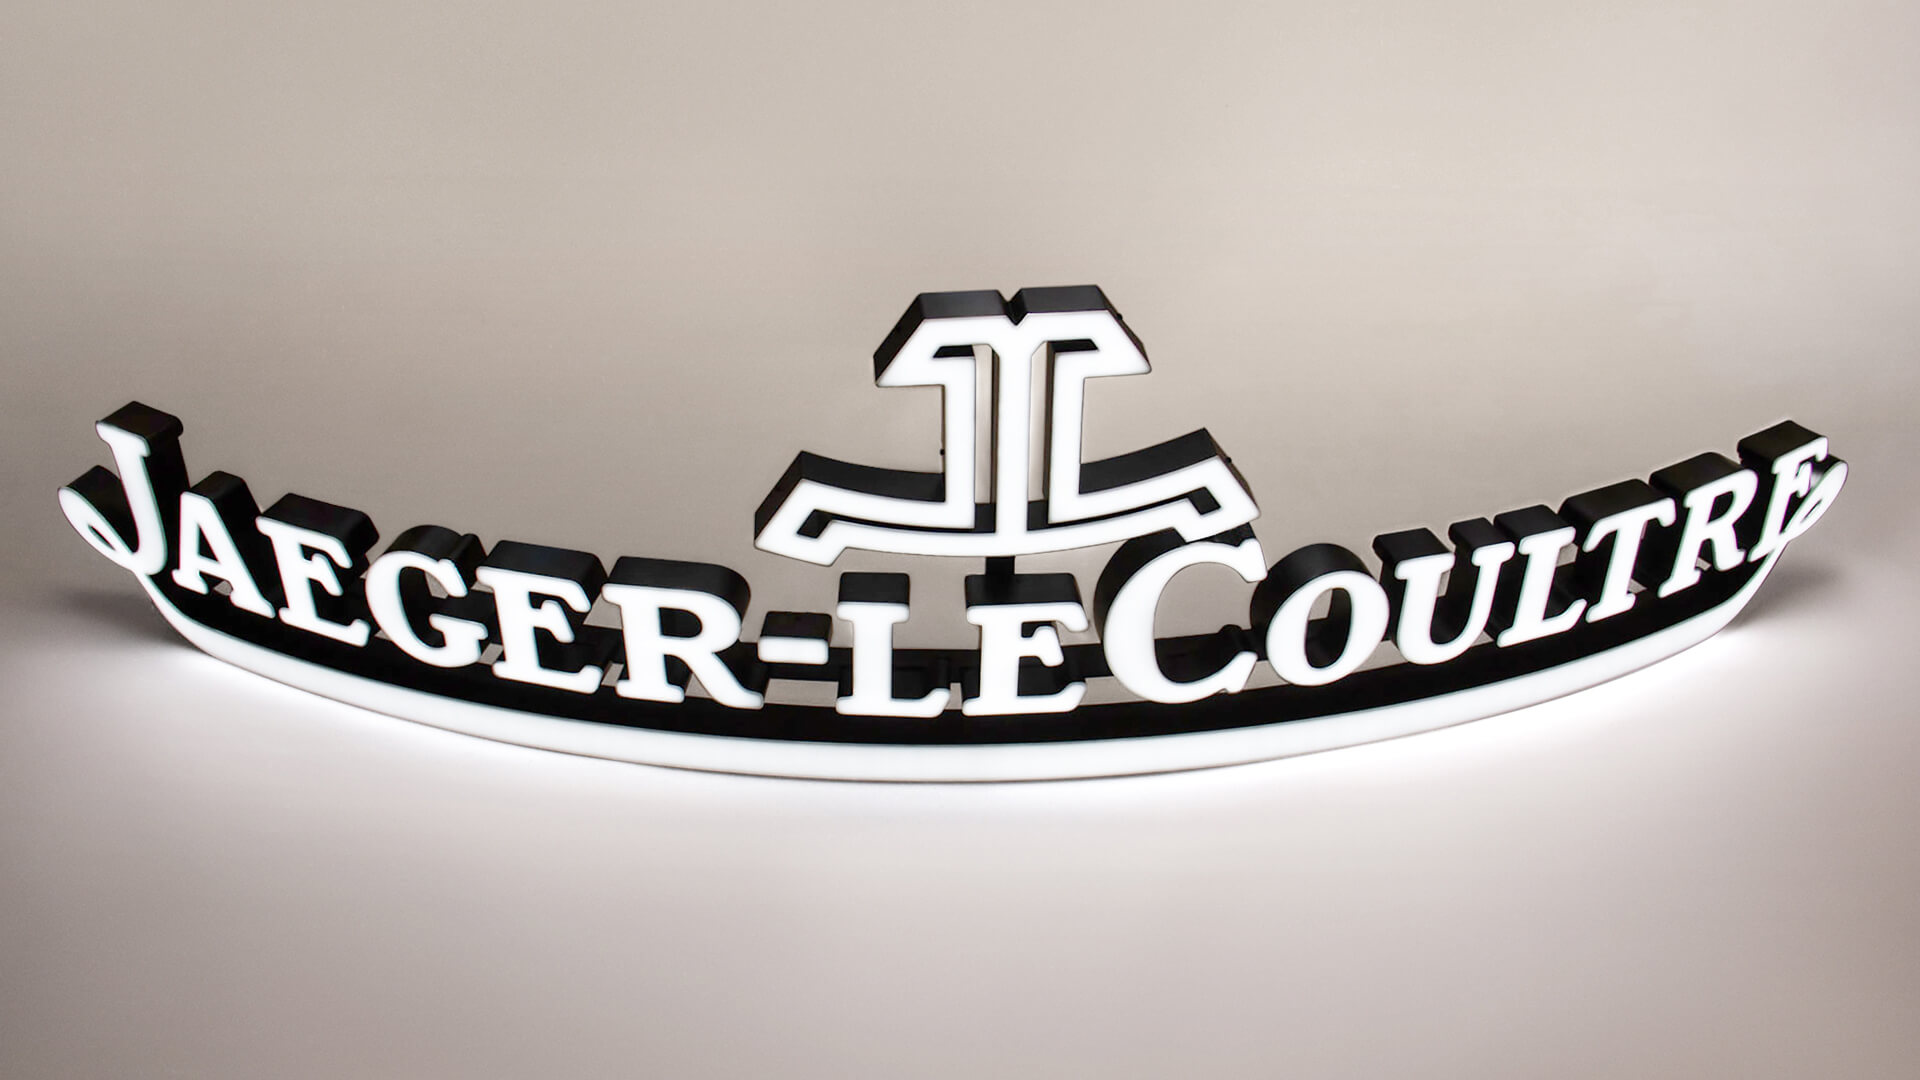 Jaeger-LeCoultre - front glowing logo in white color